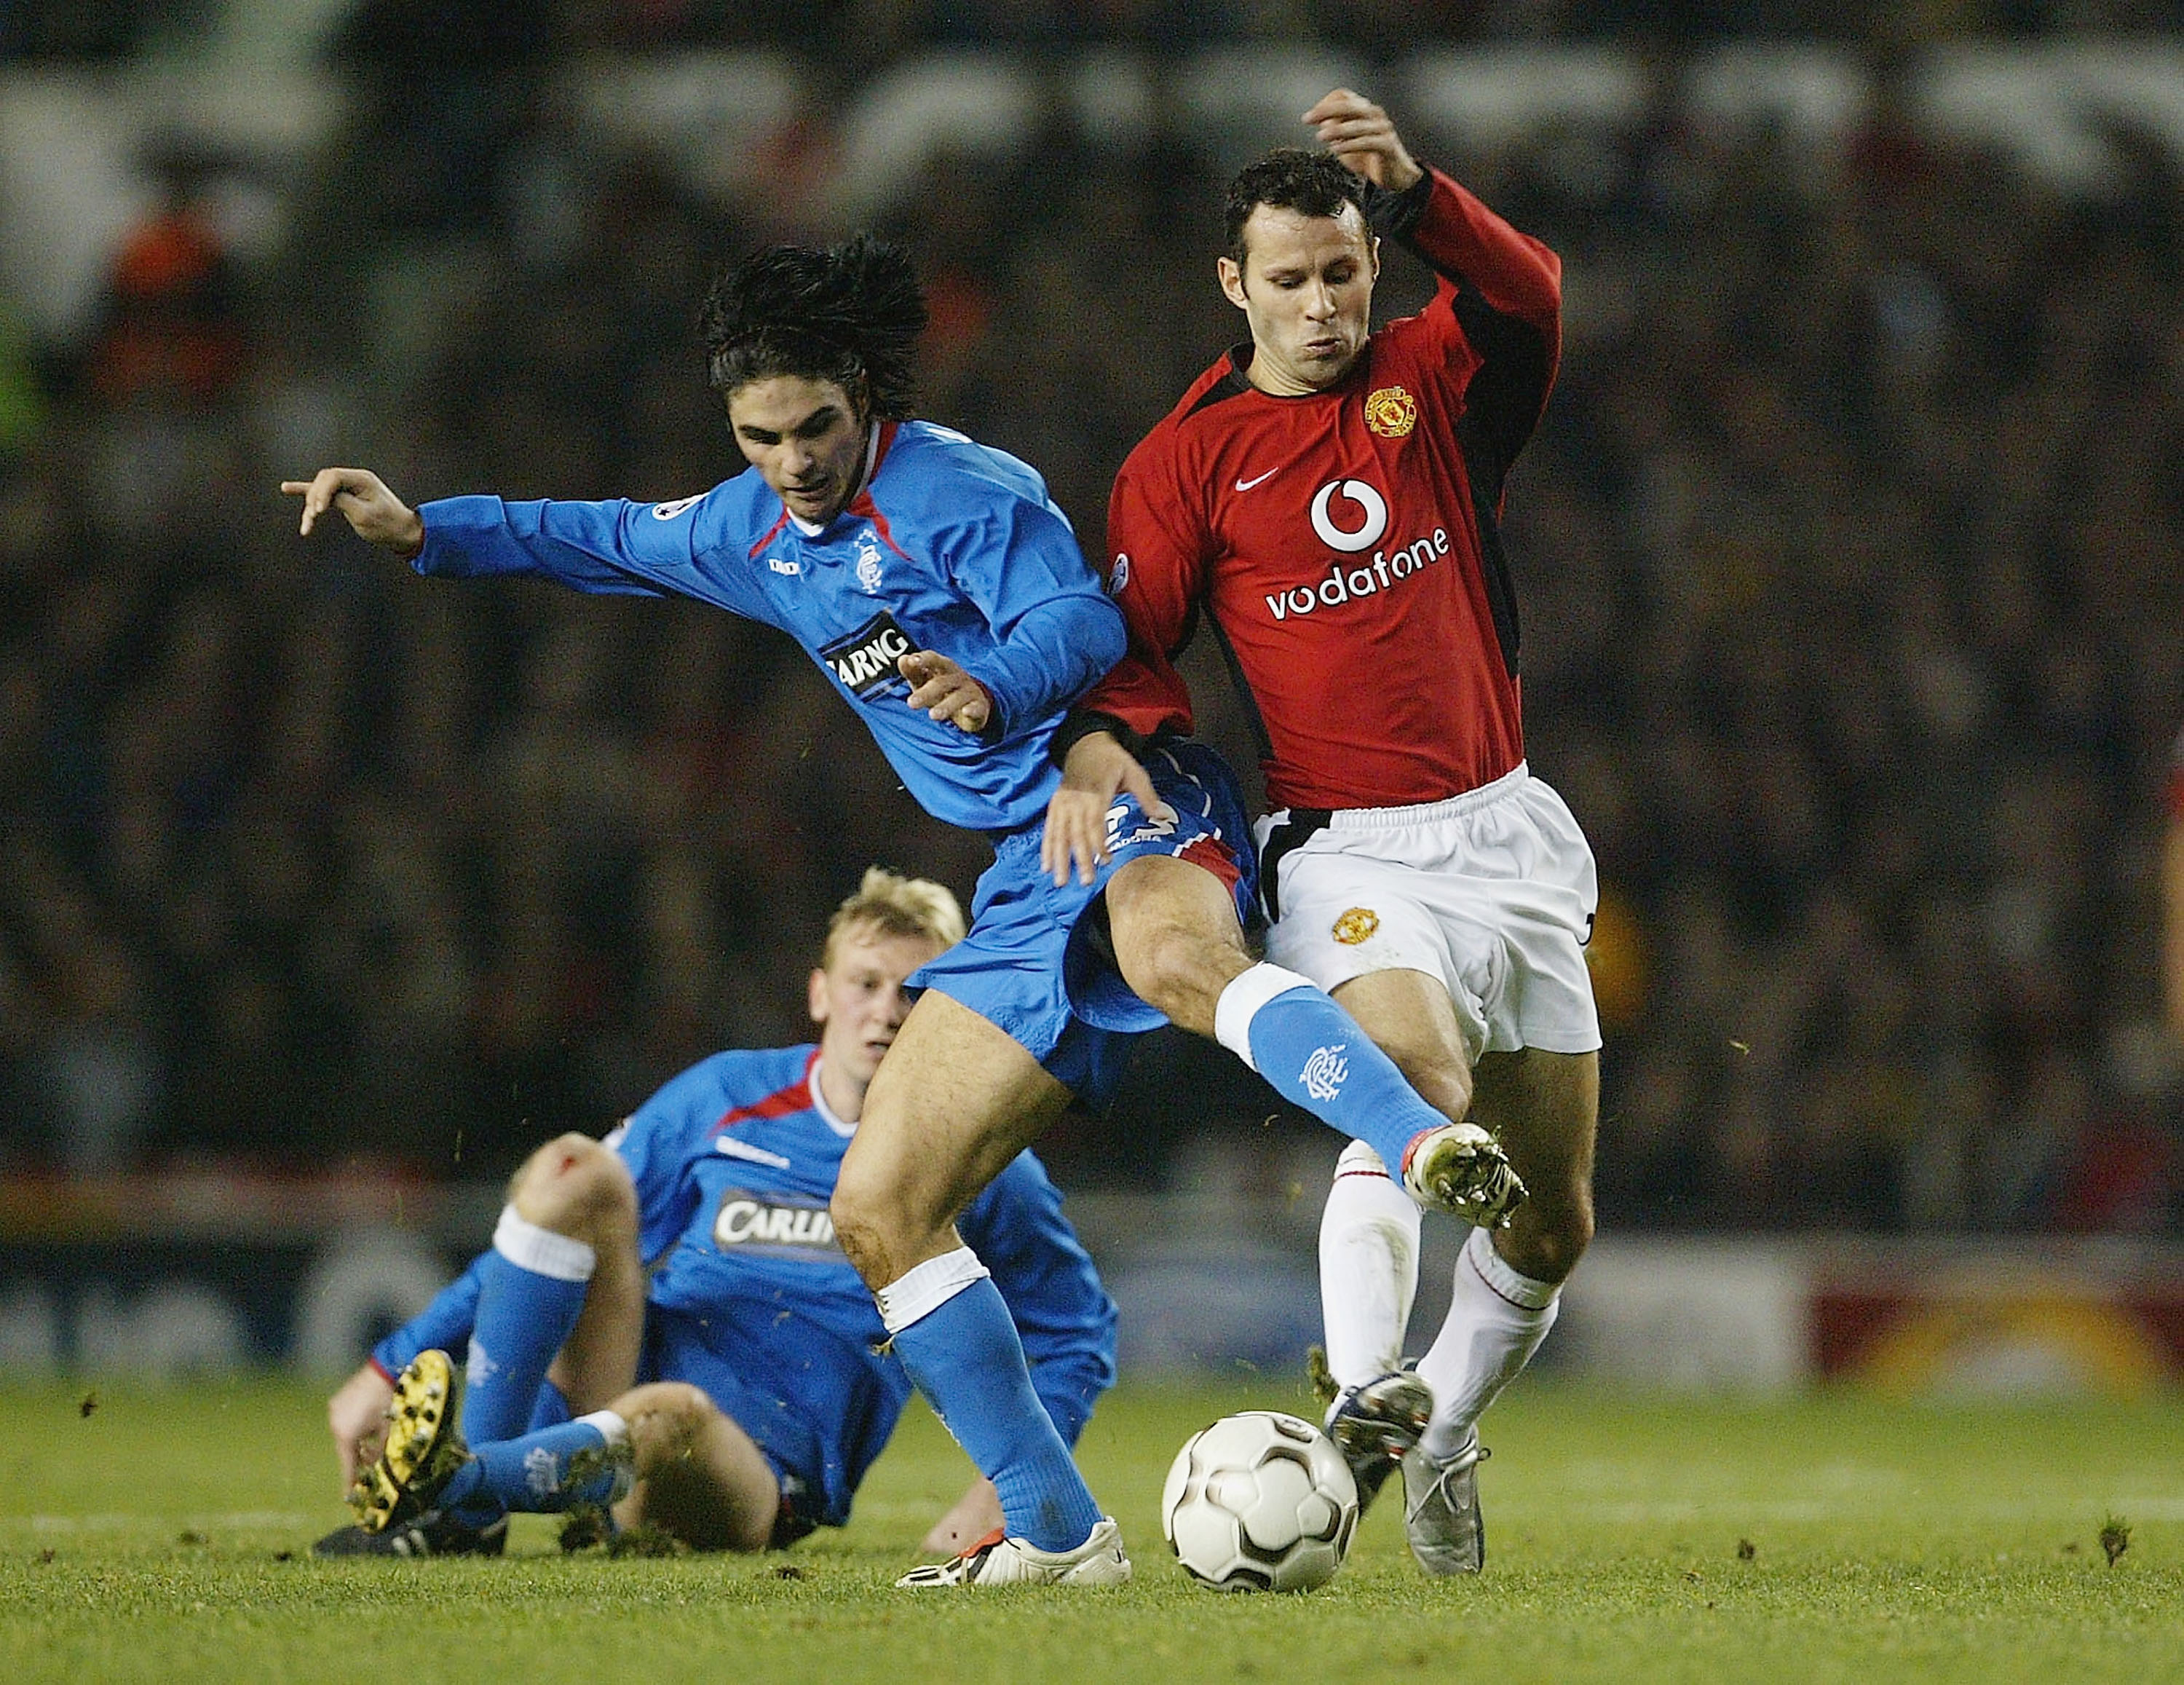 MANCHESTER, ENGLAND - NOVEMBER 4:  Ryan Giggs of Manchester United battles with Mikel Arteta of Rangers during the UEFA Champions League match between Manchester United and Rangers at Old Trafford on November 4, 2003 in Manchester, England. (Photo by Laur